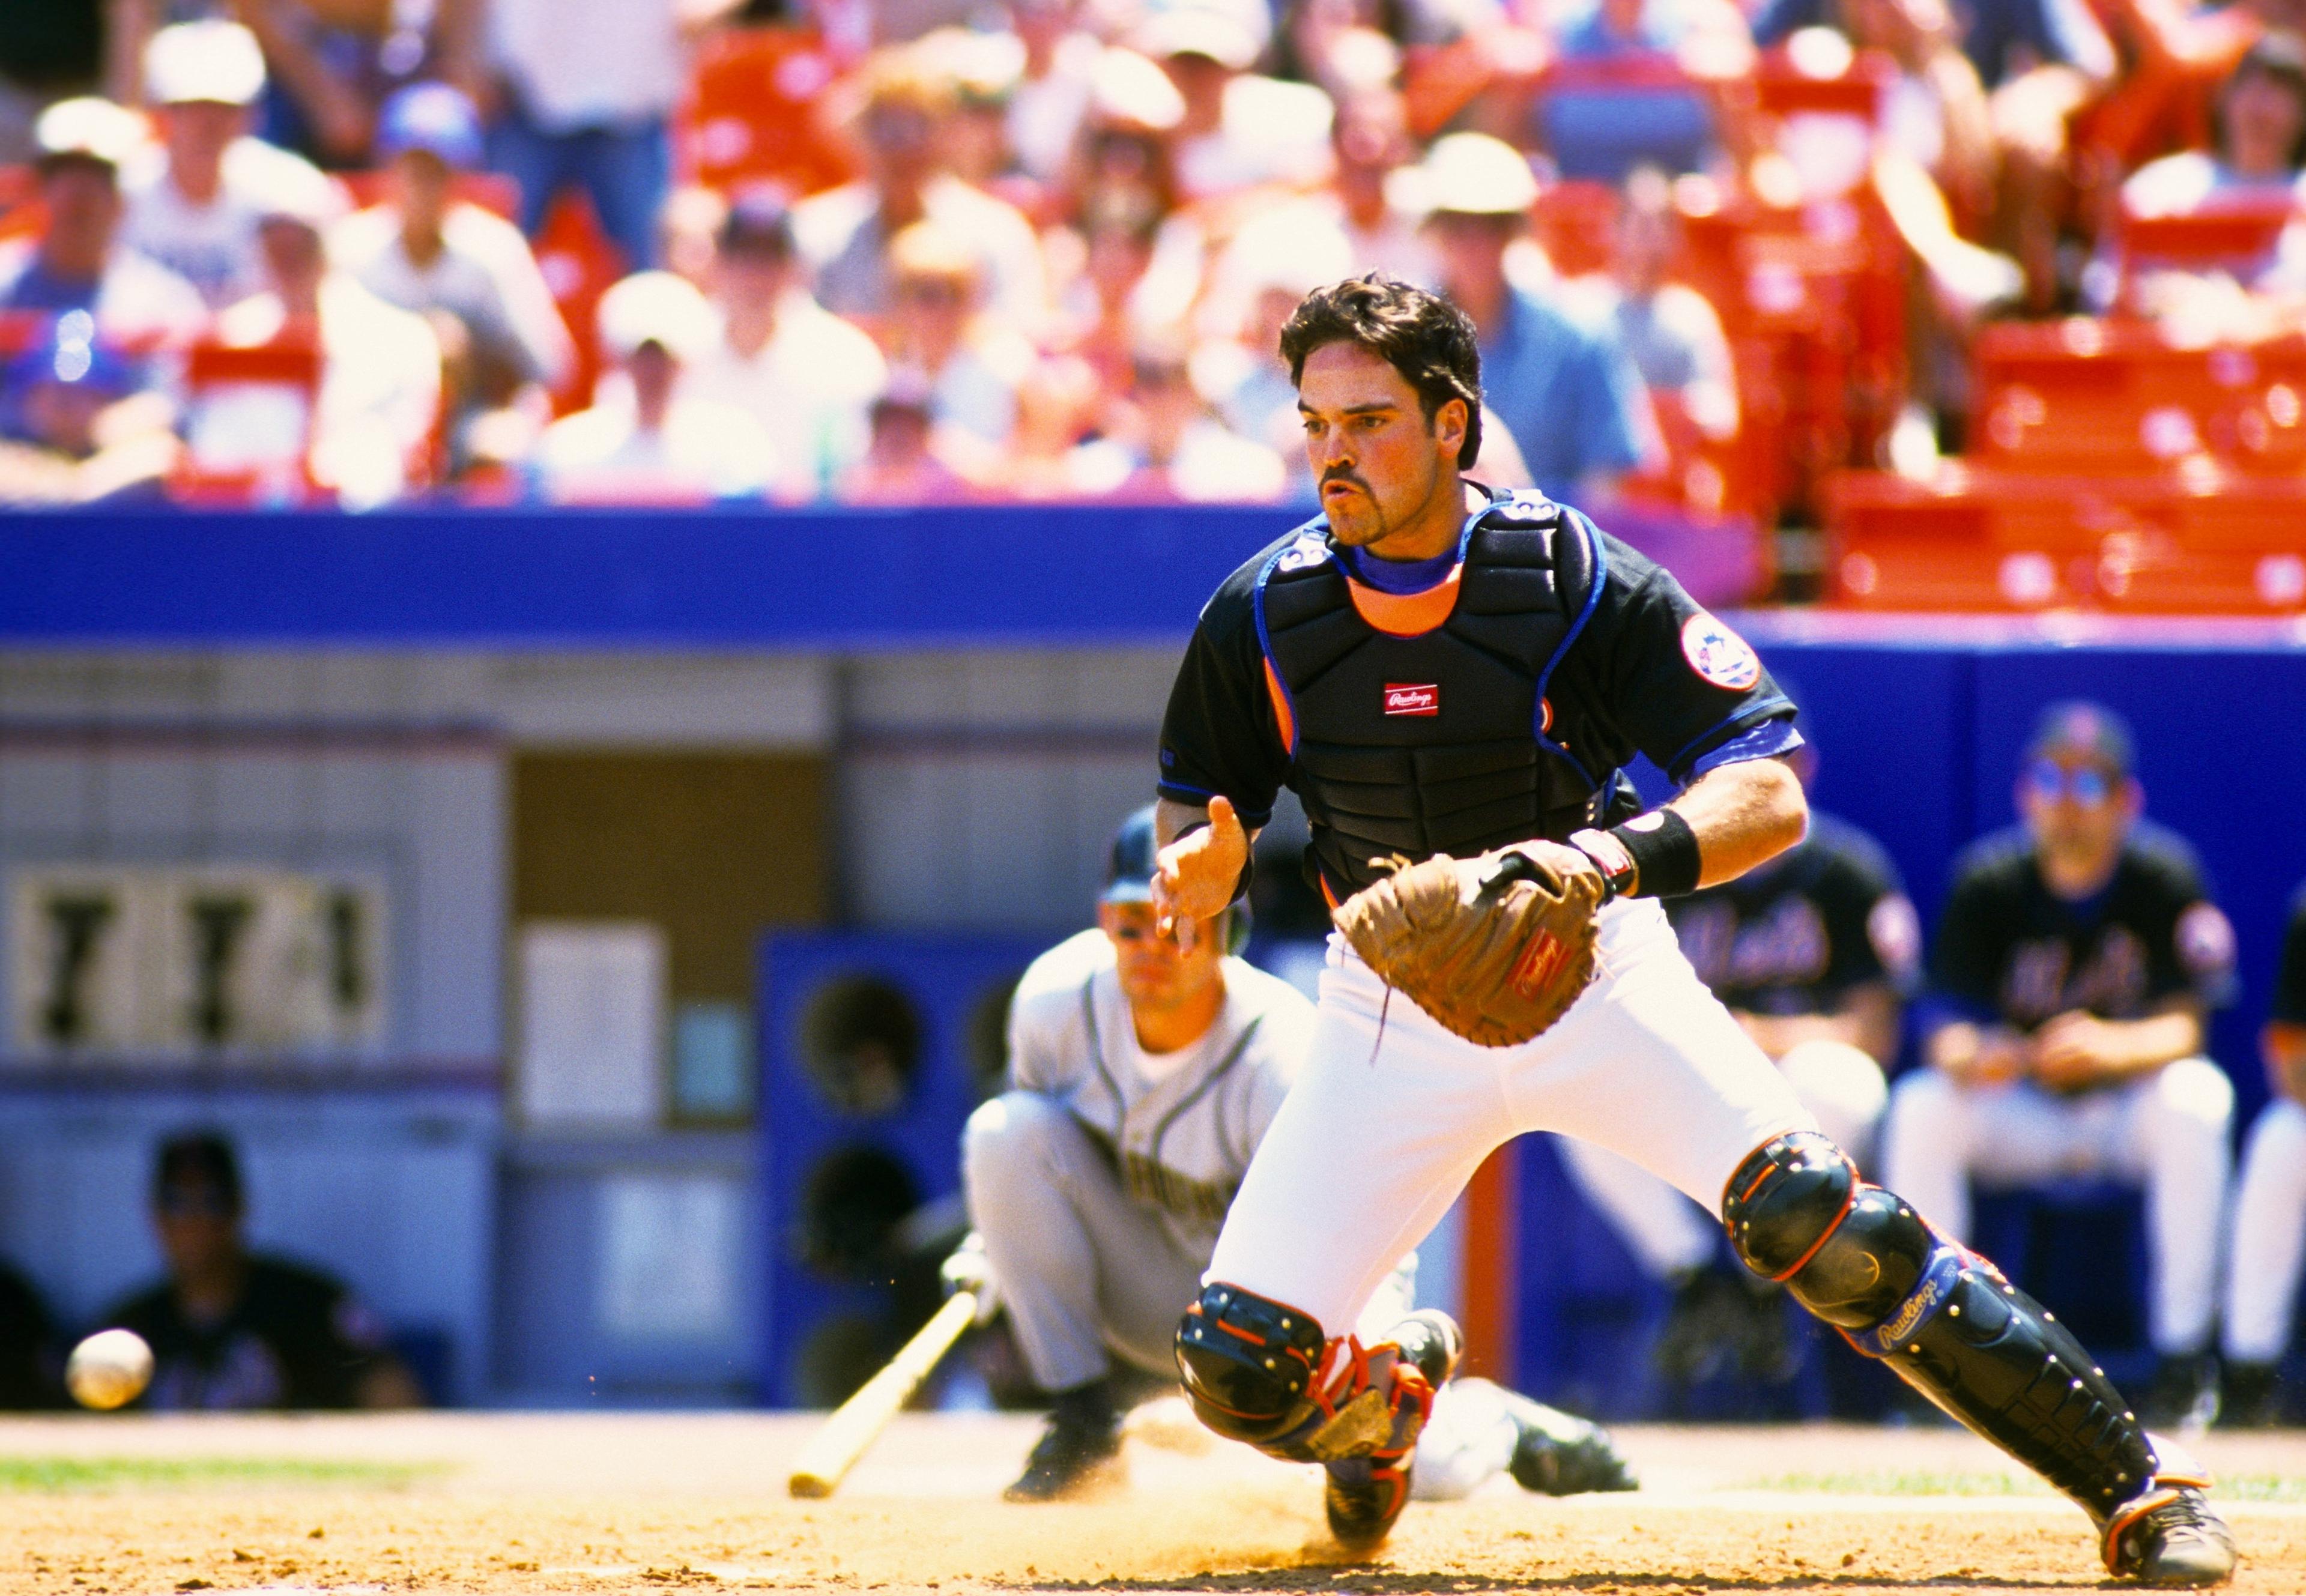 May 24, 1998; Flushing, NY, USA; FILE PHOTO; New York Mets catcher Mike Piazza (31) in action against the Milwaukee Brewers at Shea Stadium. / Lou Capozzola-USA TODAY NETWORK